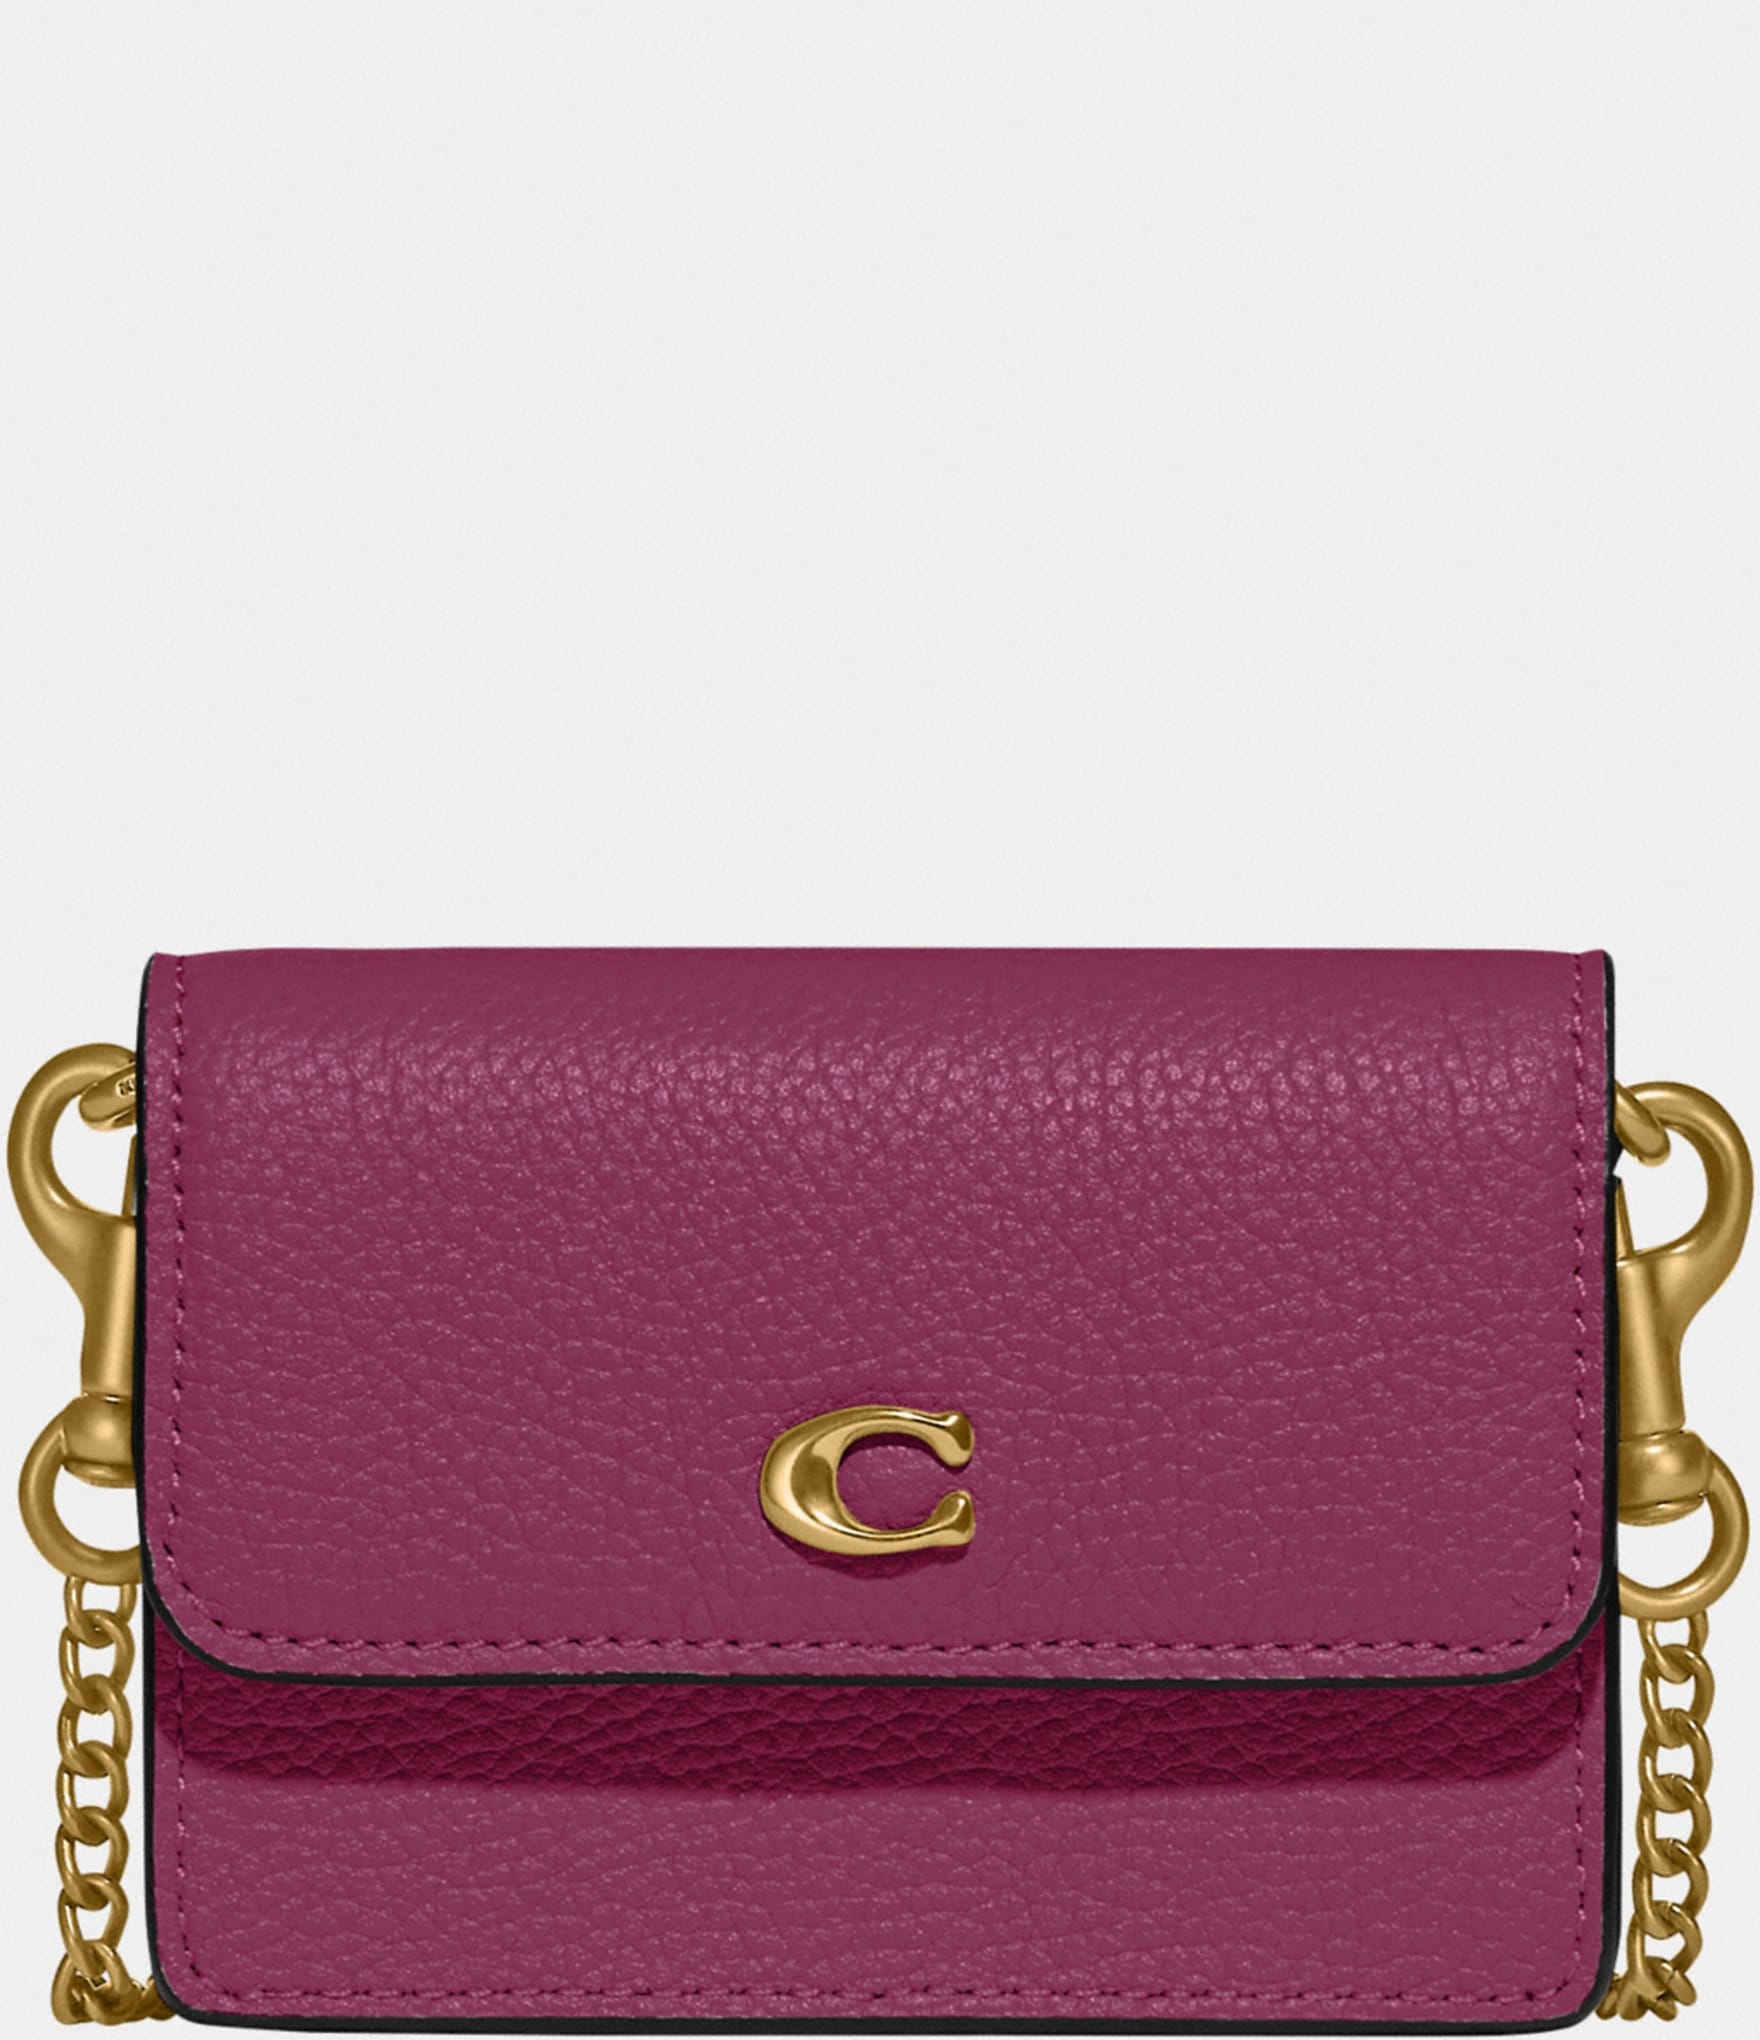  Women's Card Cases - COACH / Women's Card Cases / Women's Card  & ID Cases: Clothing, Shoes & Jewelry